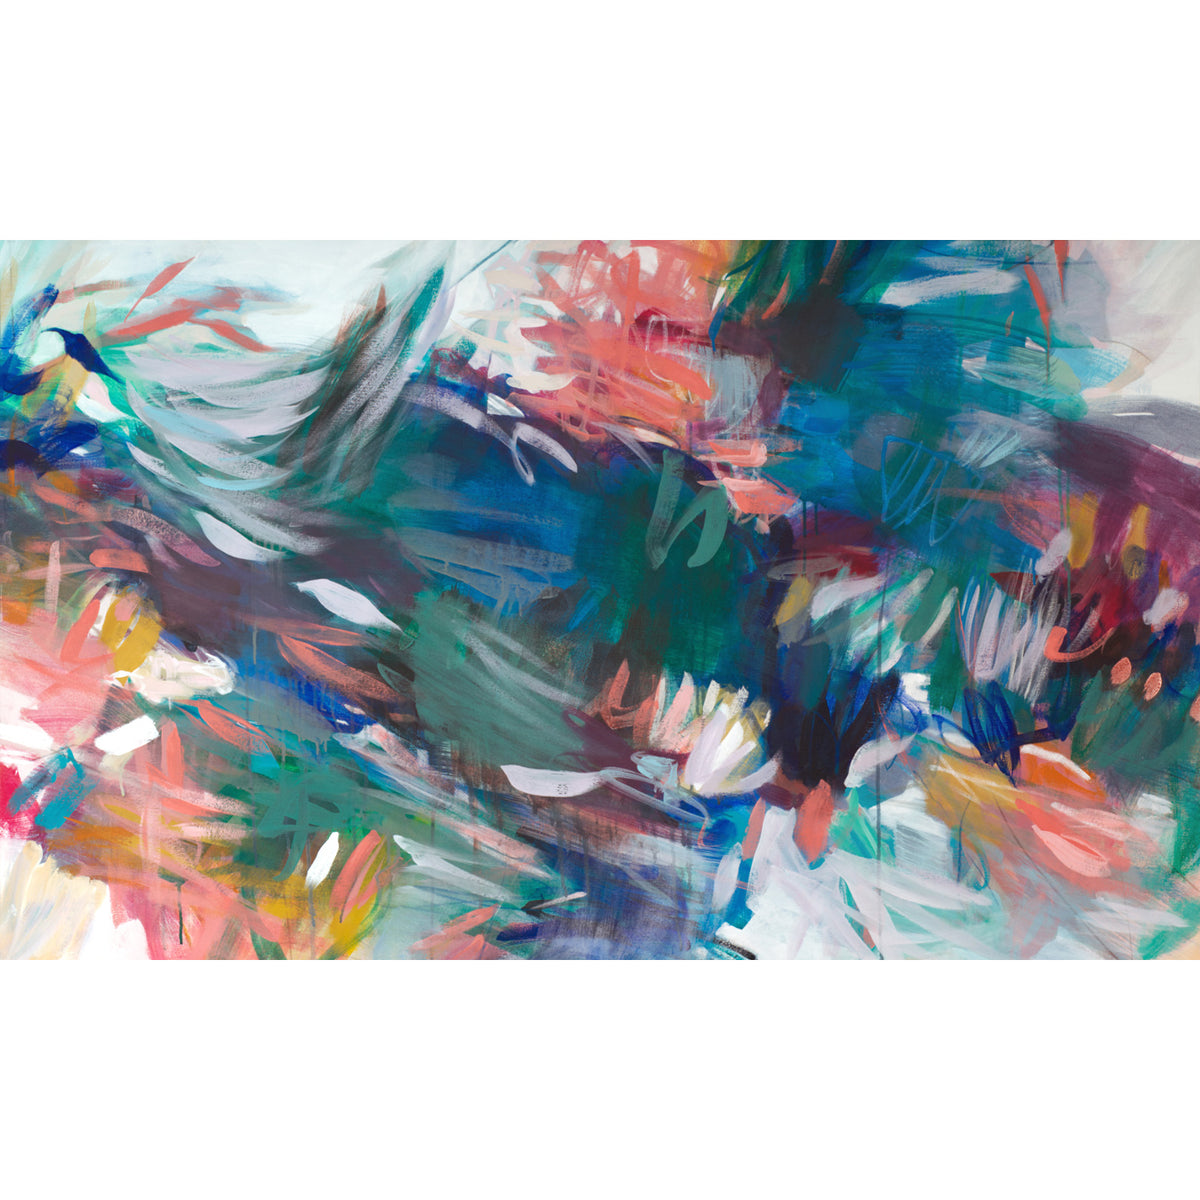 Callie Gray - Serenity in Motion, 36" x 60"